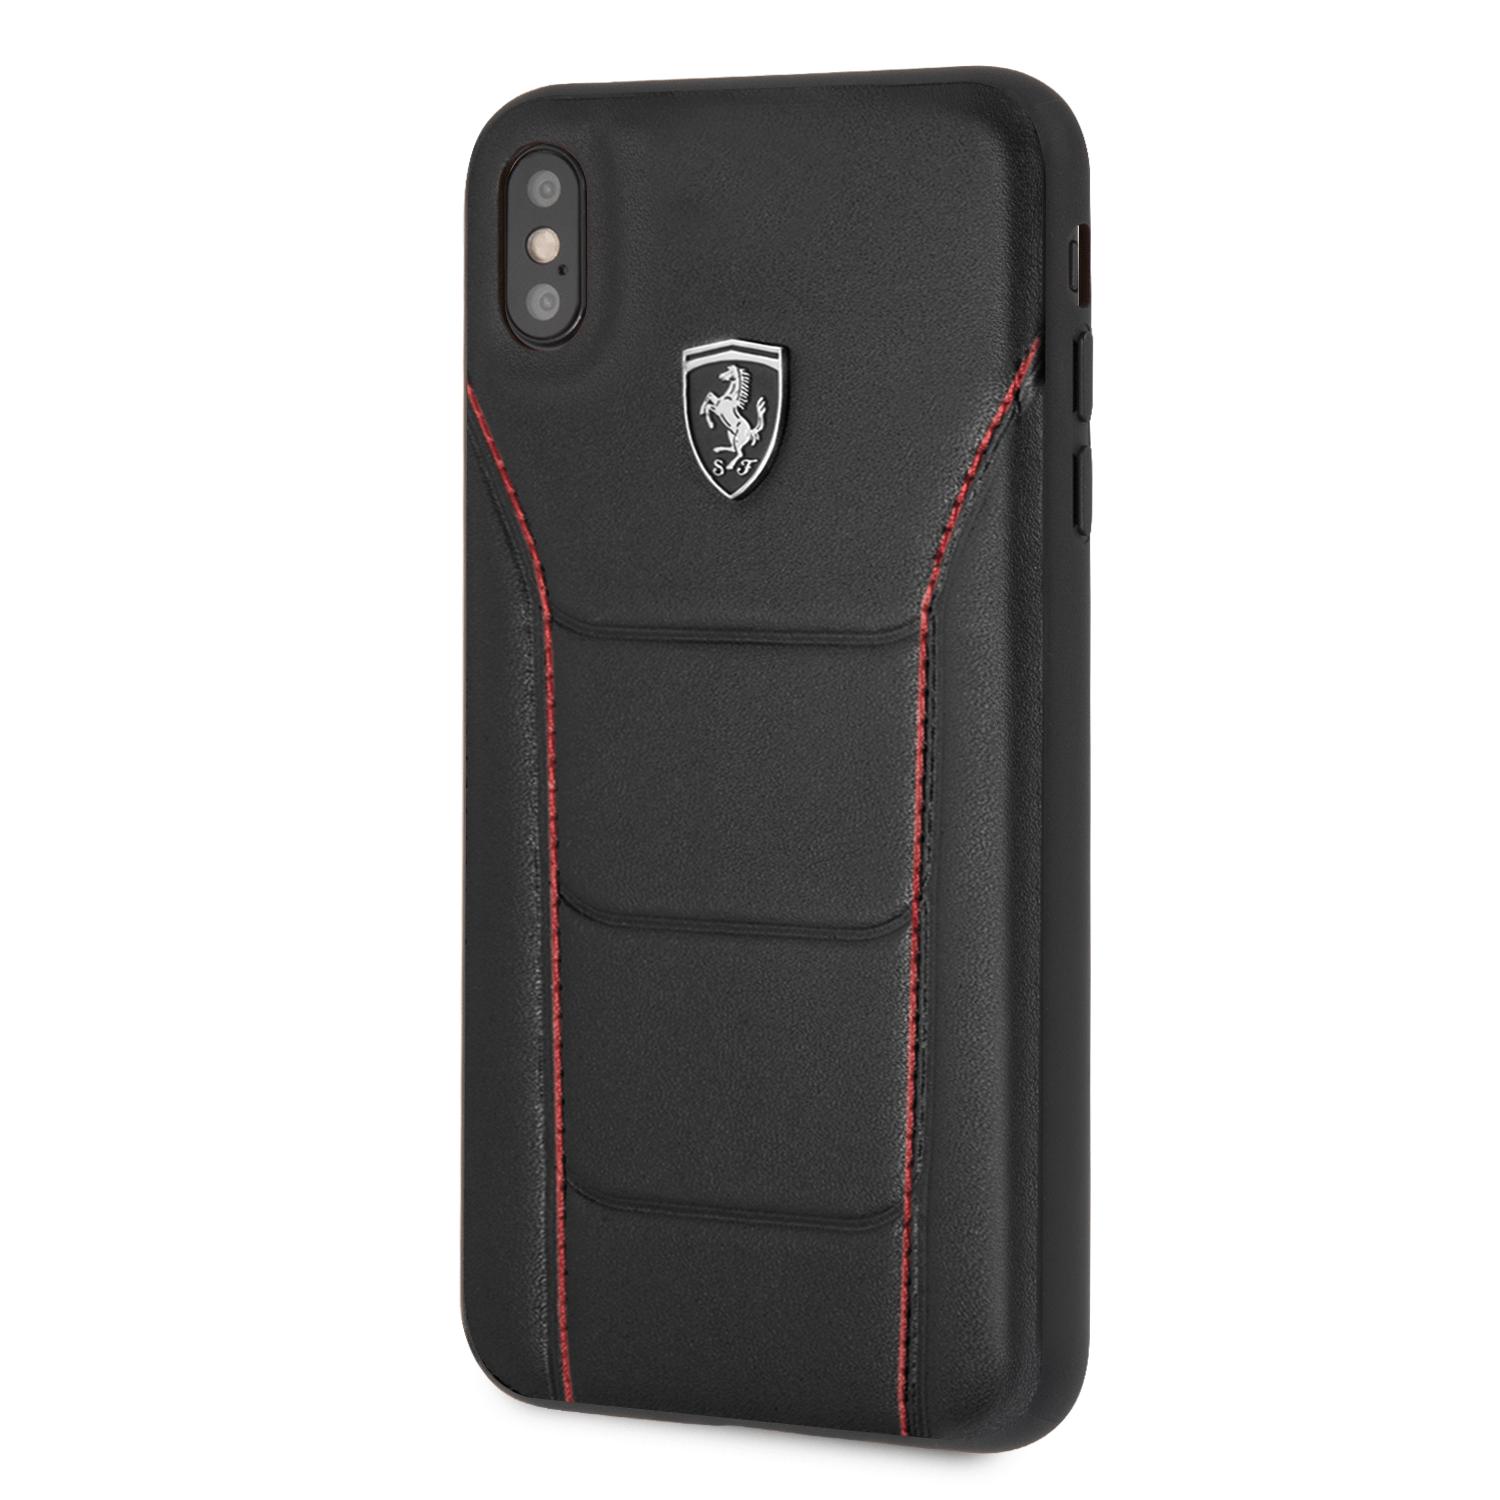 Official Ferrari Genuine Leather Heritage Black Case for iPhone XS Max